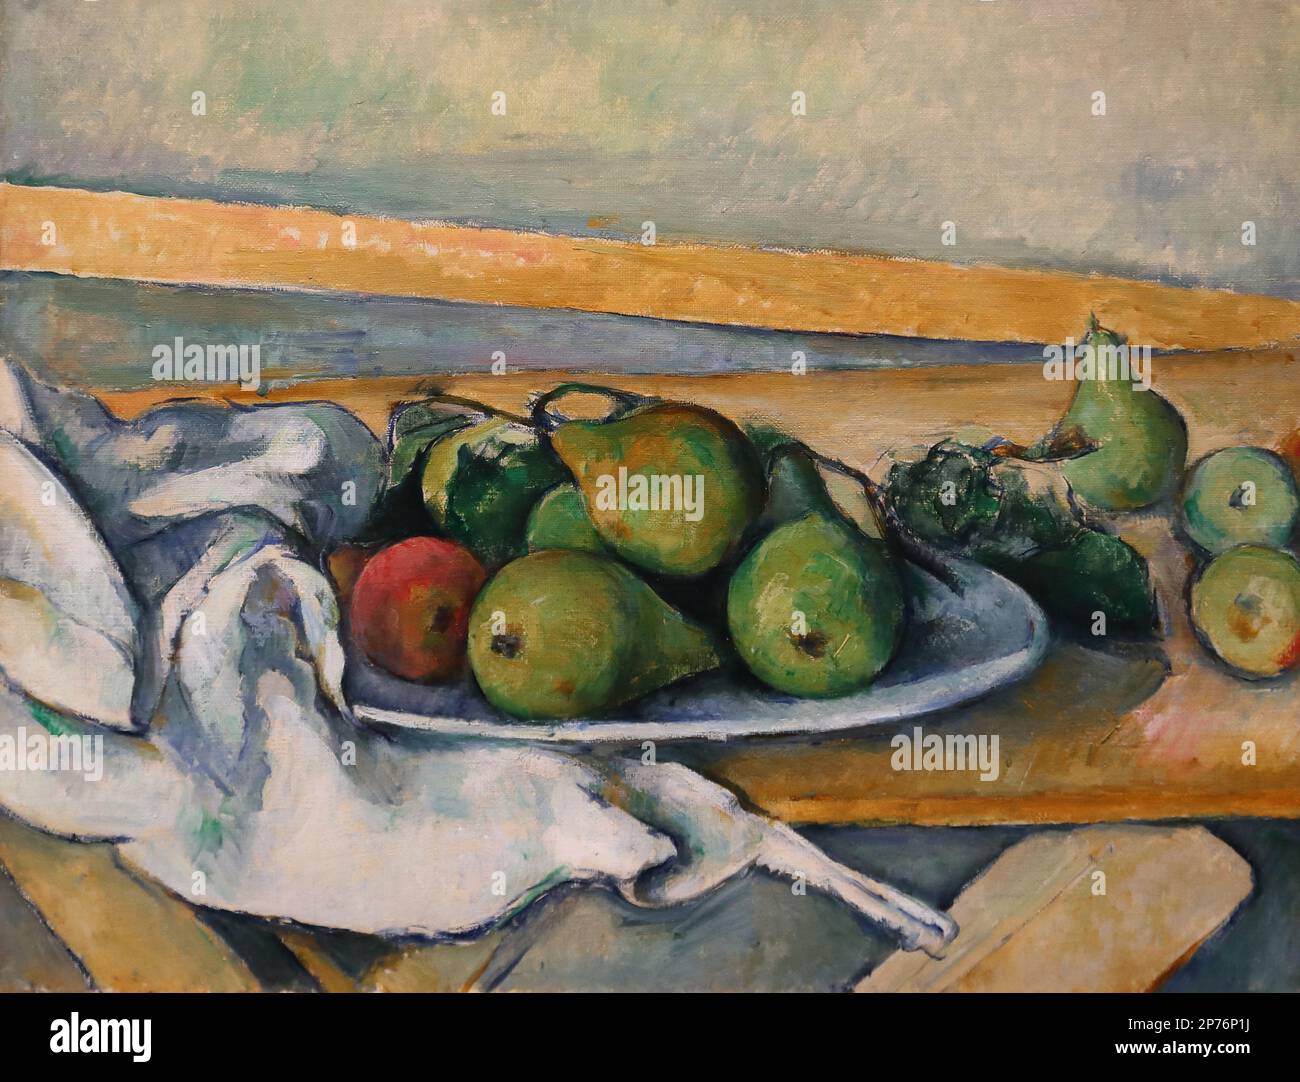 Still-Leben mit Birnen (Still-life with pears) by French Impressionist painter Paul Cezanne at the Wallraf-Richartz Museum, Cologne, Germany Stock Photo